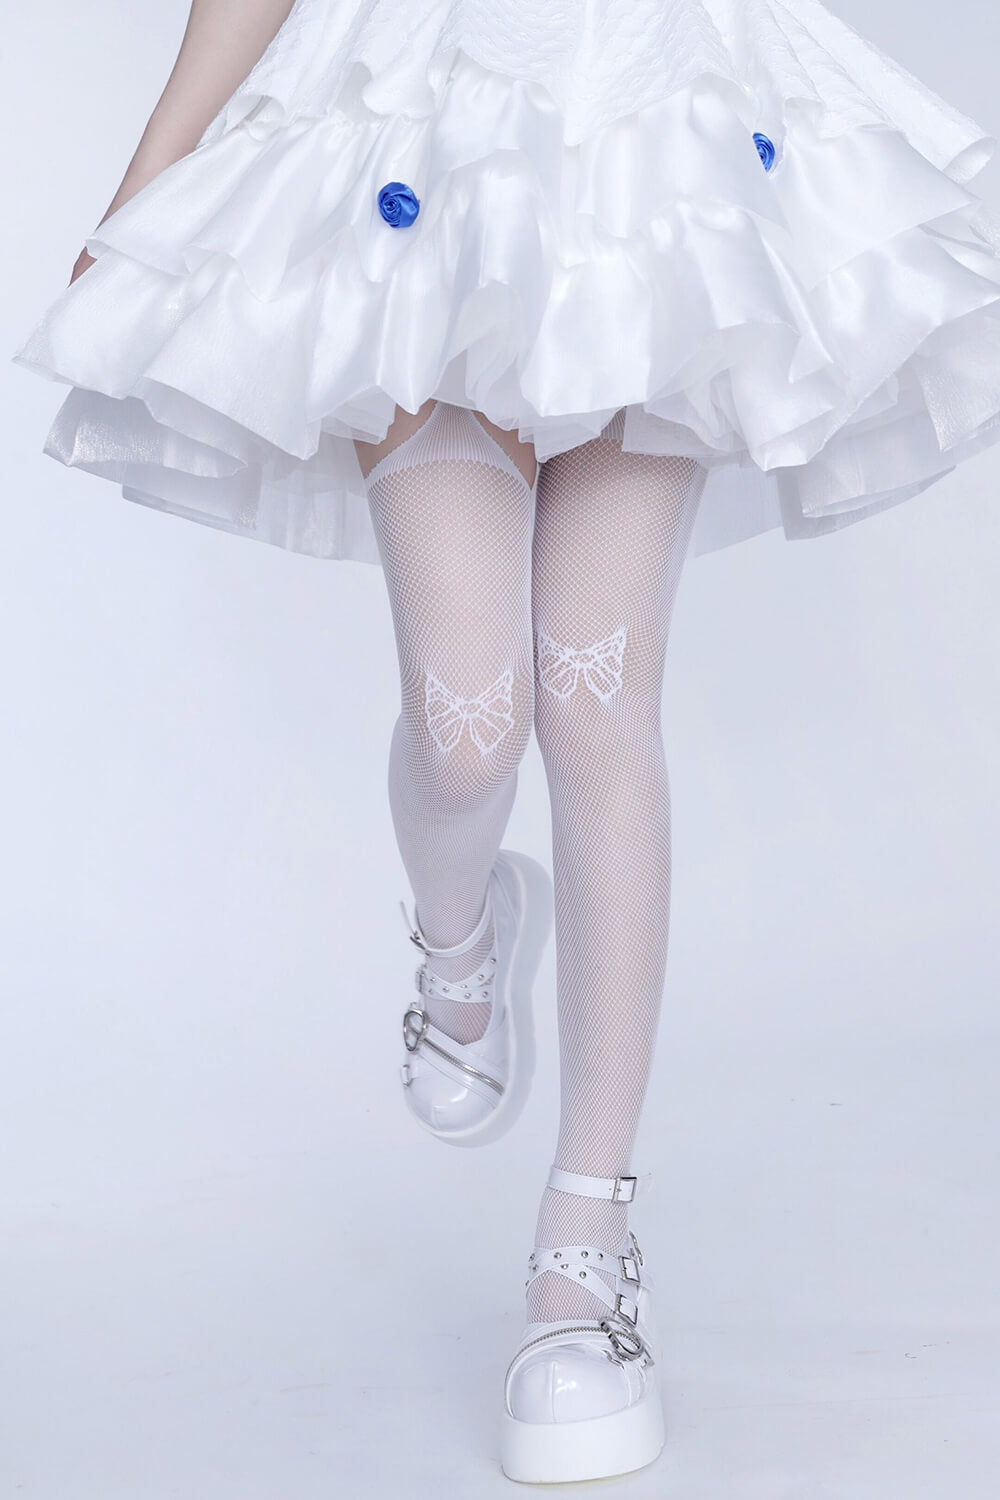 bow-pattern-fishnet-tights-thigh-high-suspender-stockings-in-white